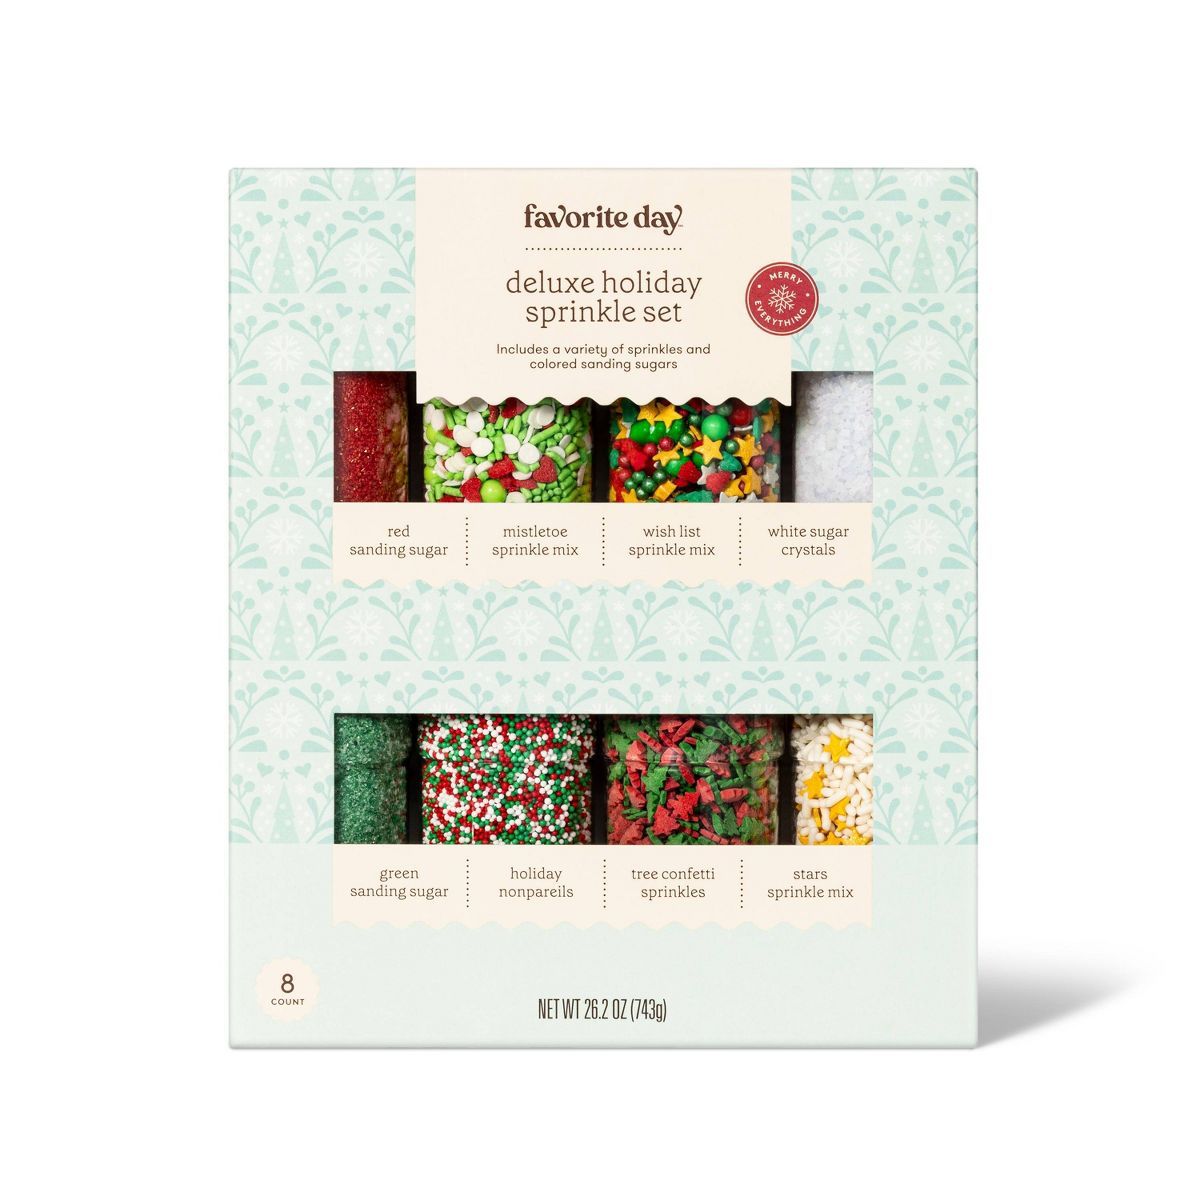 Holiday Deluxe Holiday Sprinkle Set - 26.2oz - Favorite Day™ | Target